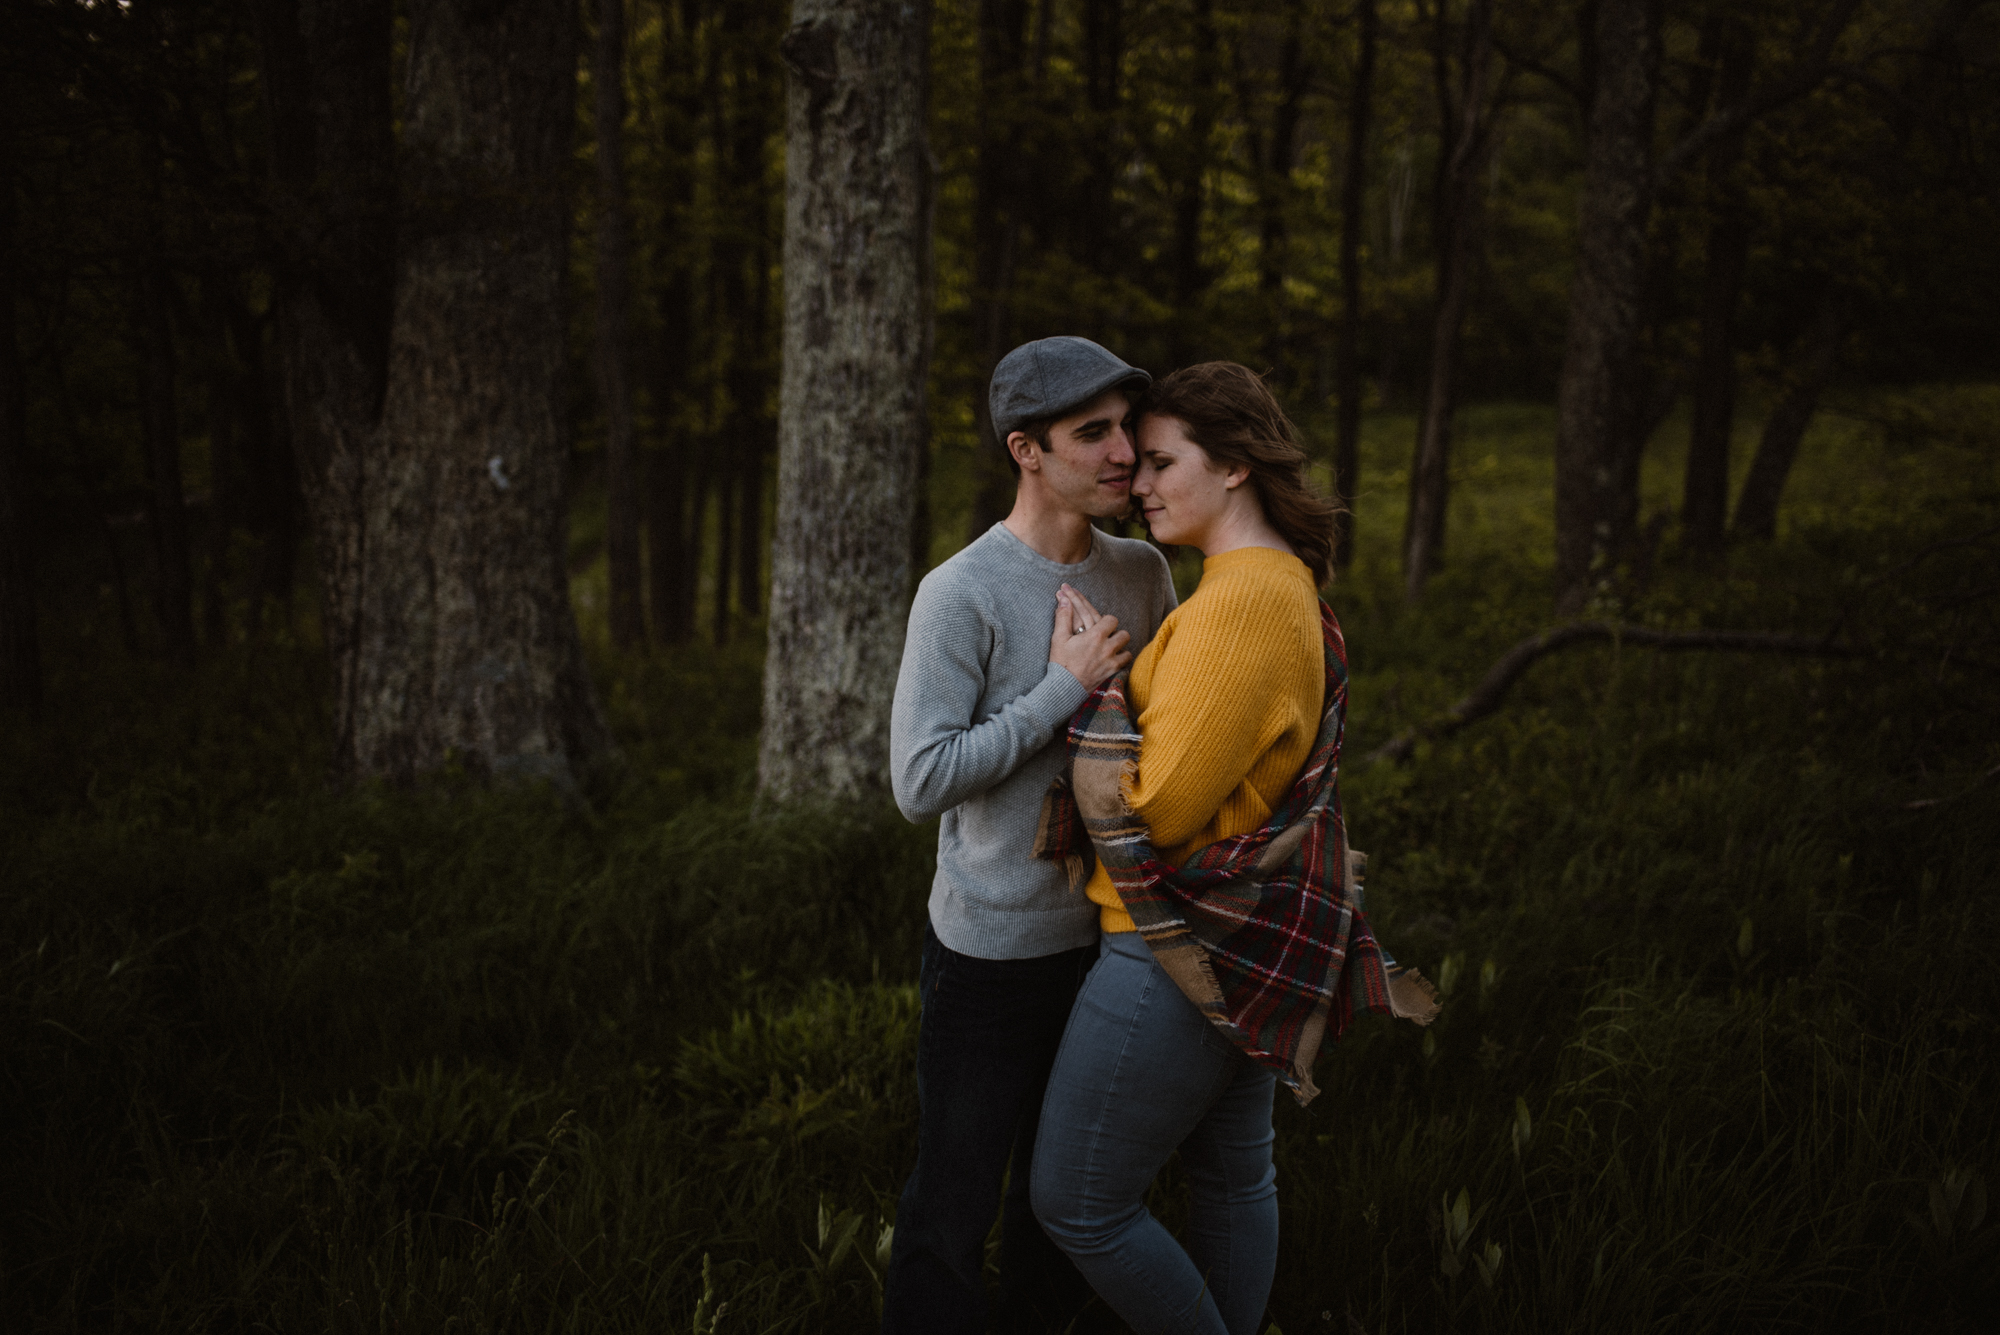 Sloane and Evan Sunrise Engagement Session in Shenandoah National Park - Things to Do in Luray Virginia - Adventurous Couple Photo Shoot White Sails Creative_18.jpg